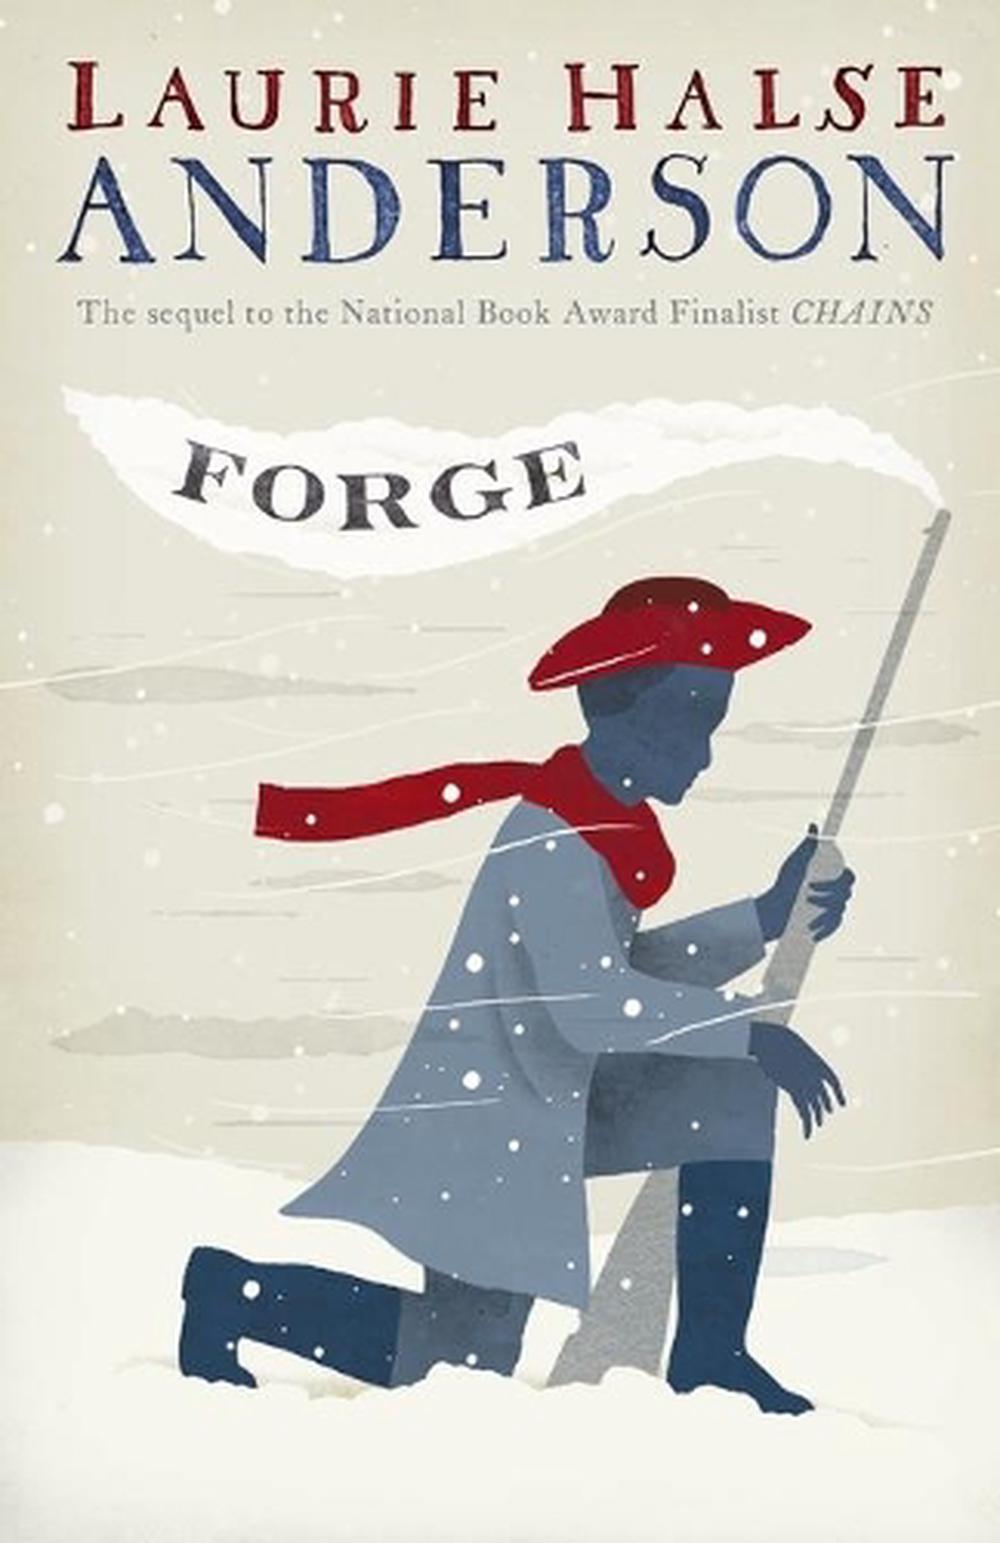 blood on the forge by william attaway